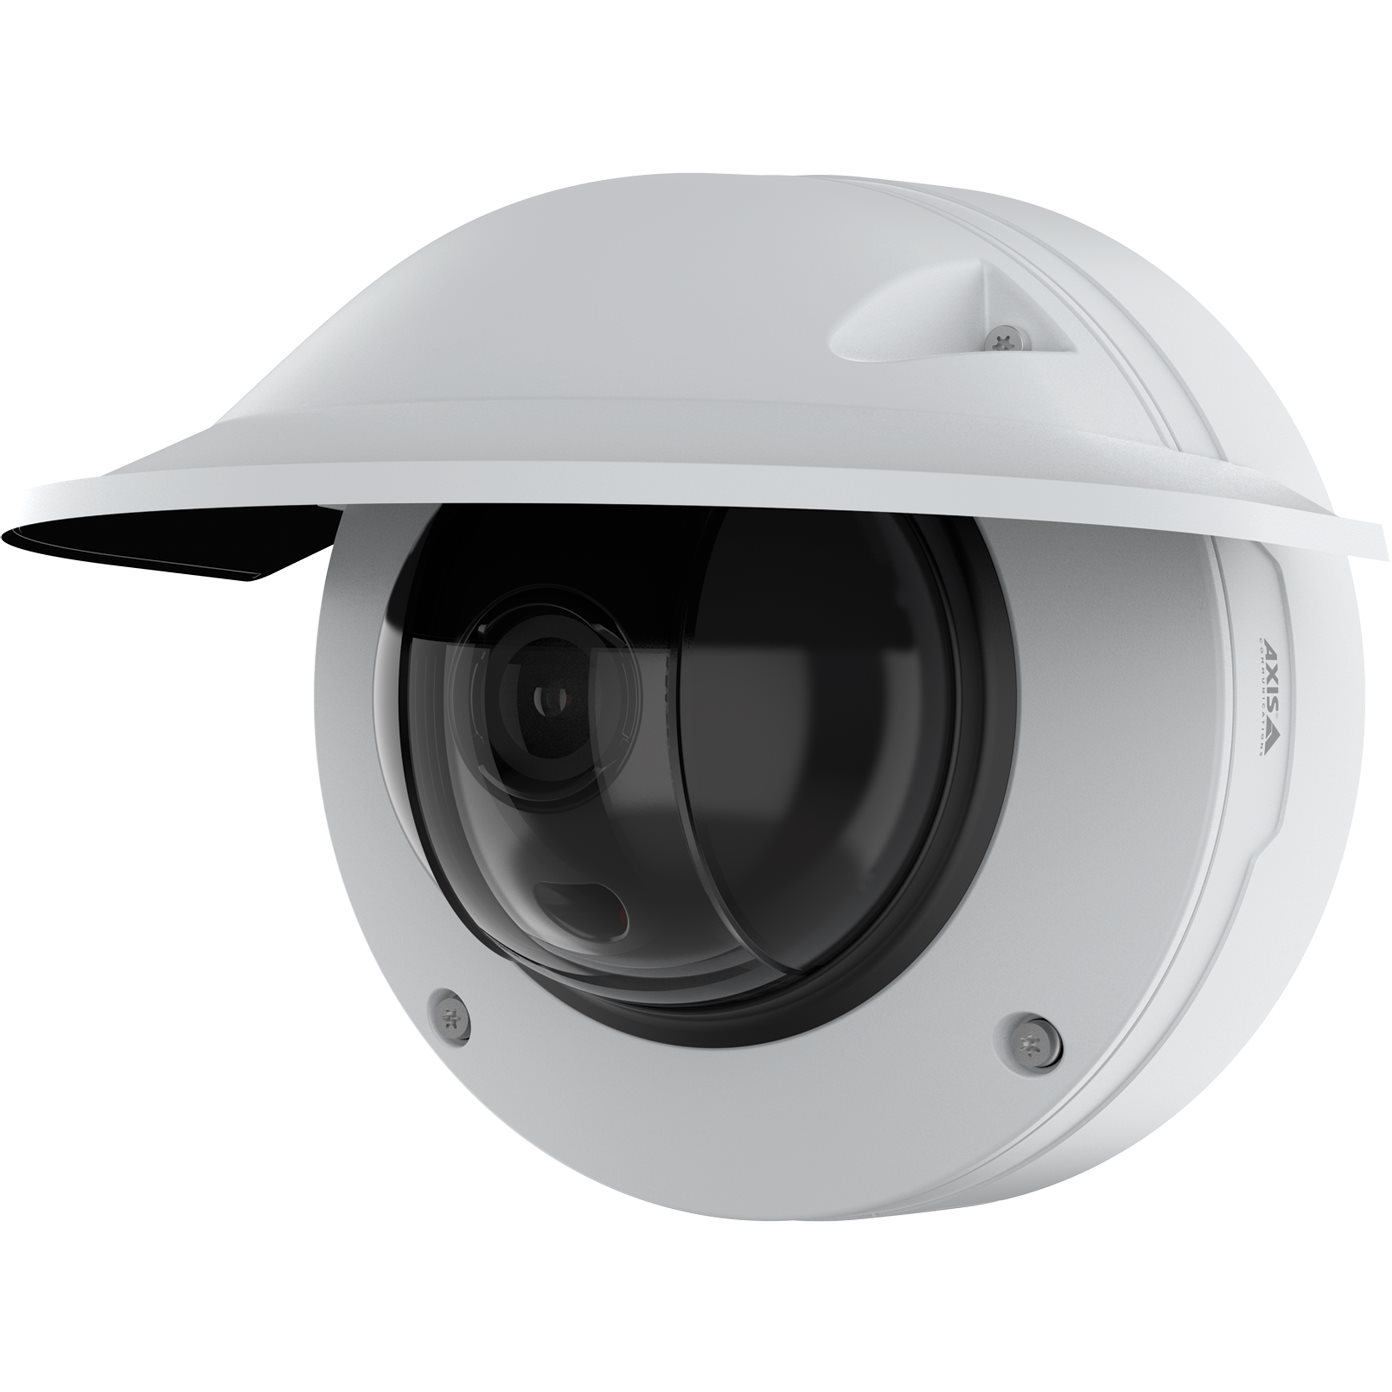 Camra Axis Q3538-LVE DOME CAMERA 02225-001